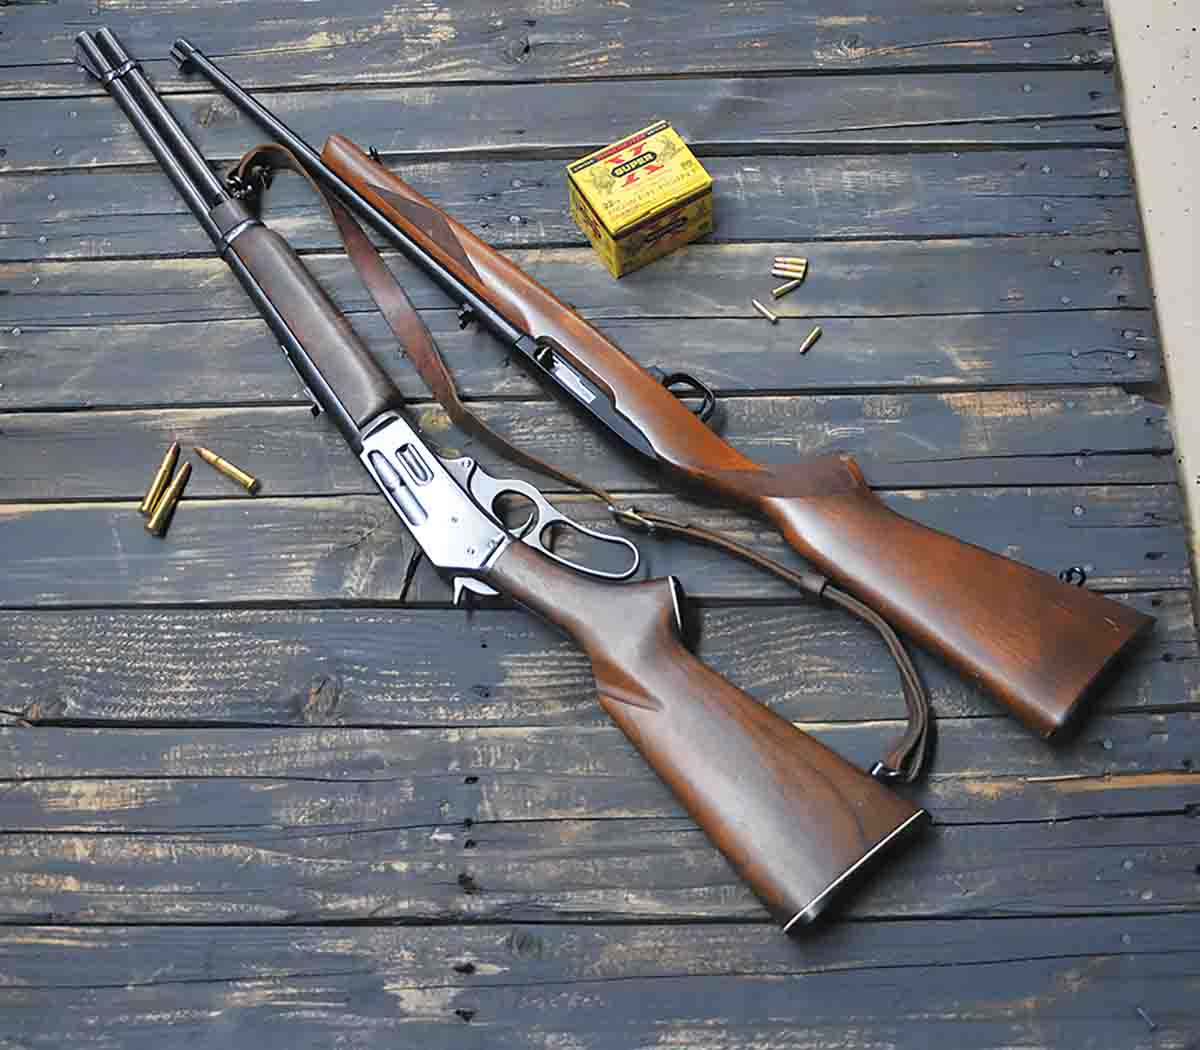 At right, Lee’s father’s Ruger Model 10/22 Sporter rifle (circa 1970) provided a  foundation of safe shooting and hunting experiences for several young shooters. Left, the Marlin .30-30 remains in excellent condition and gets  a workout now and then.